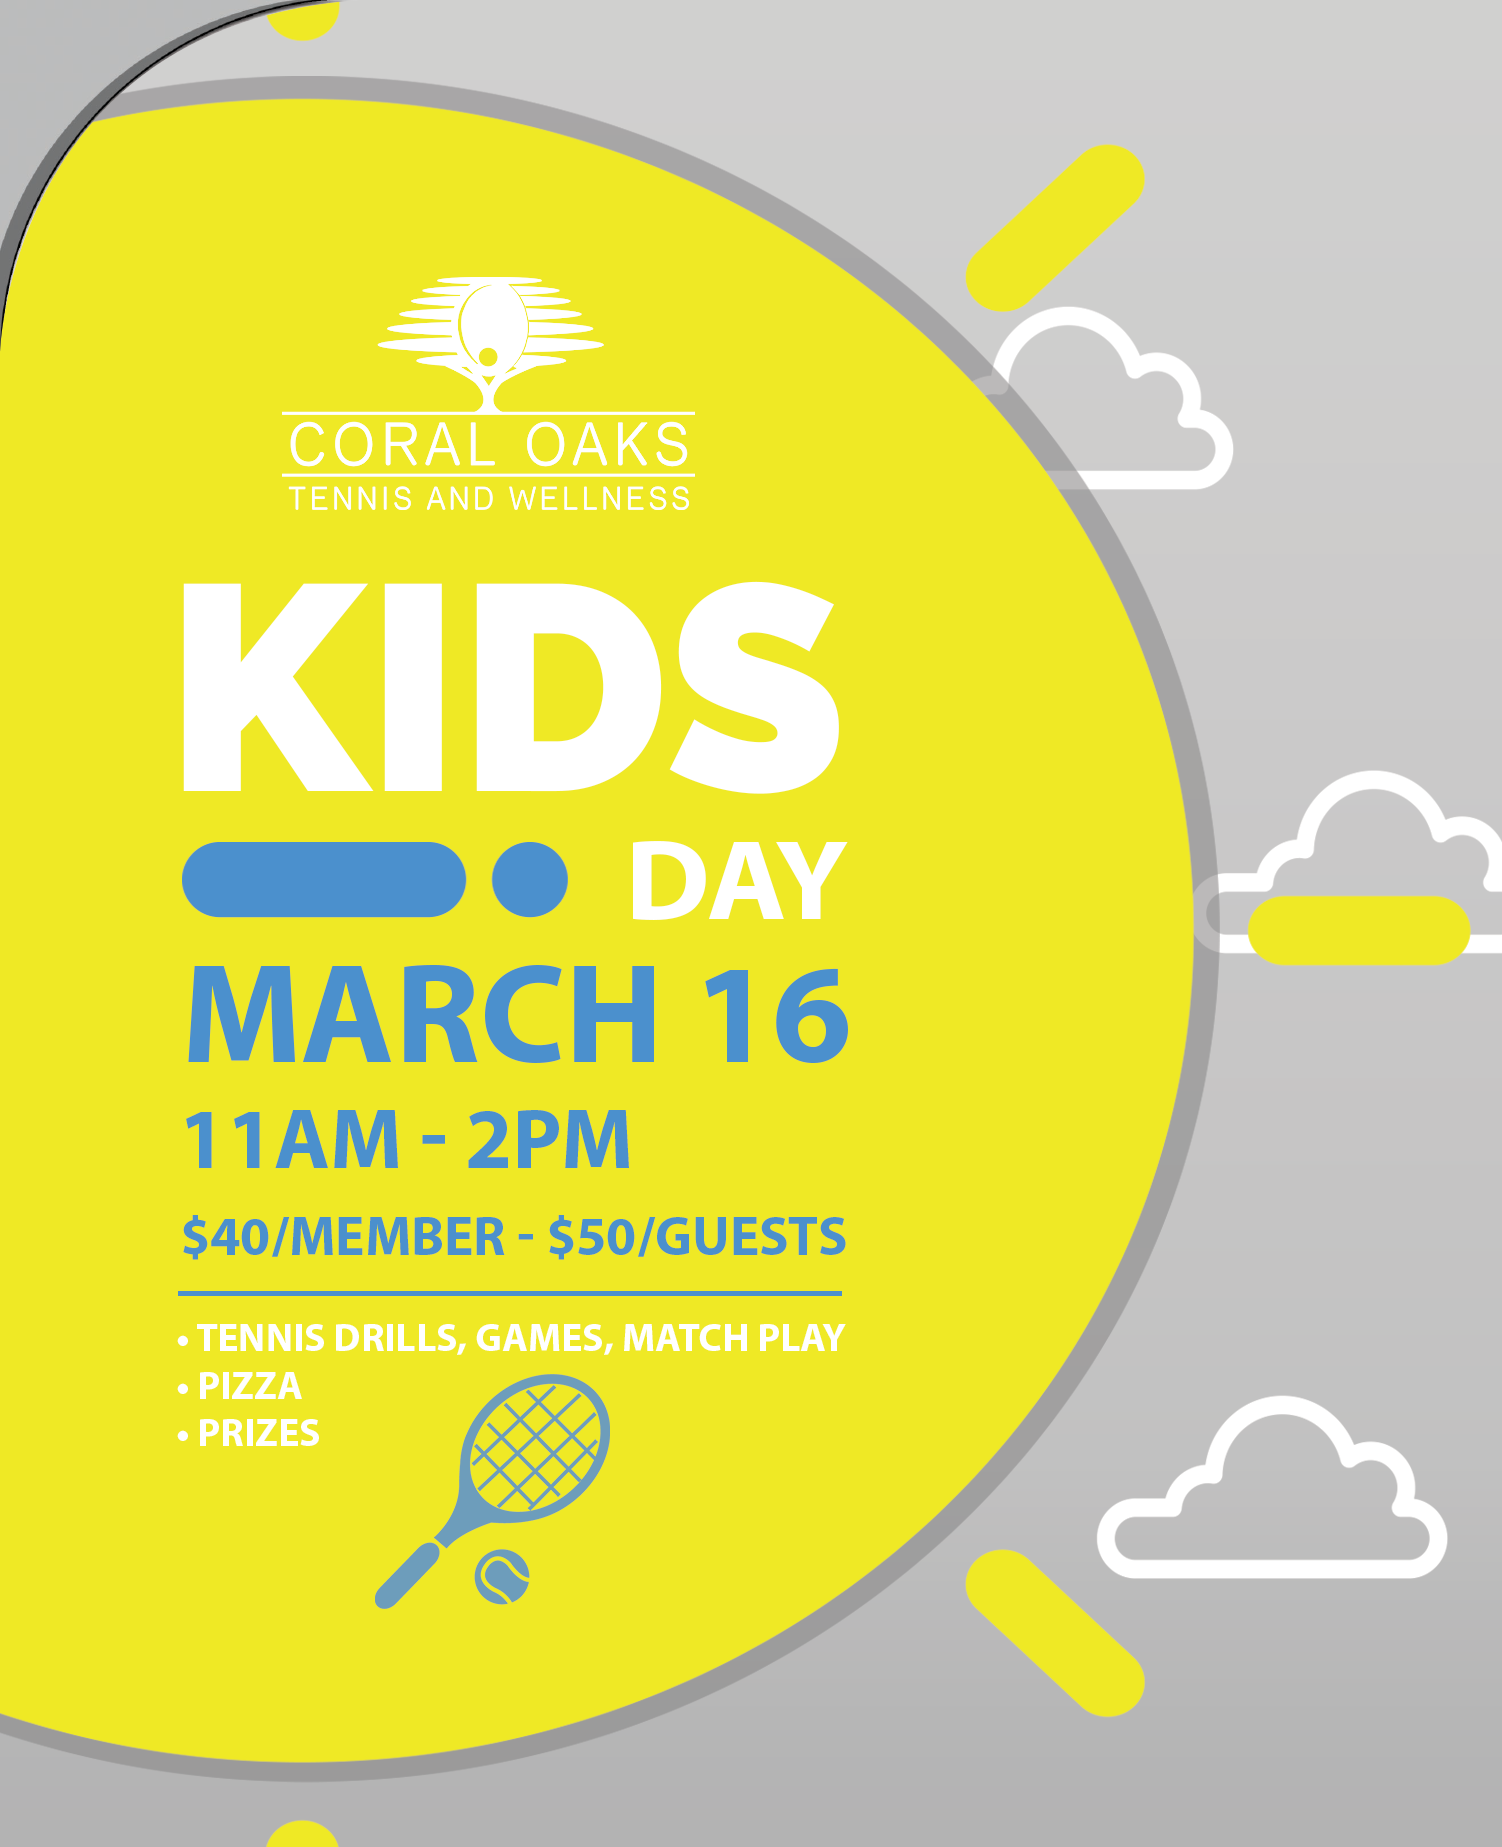 Kids Day – March 16th, Saturday 11AM – 2PM